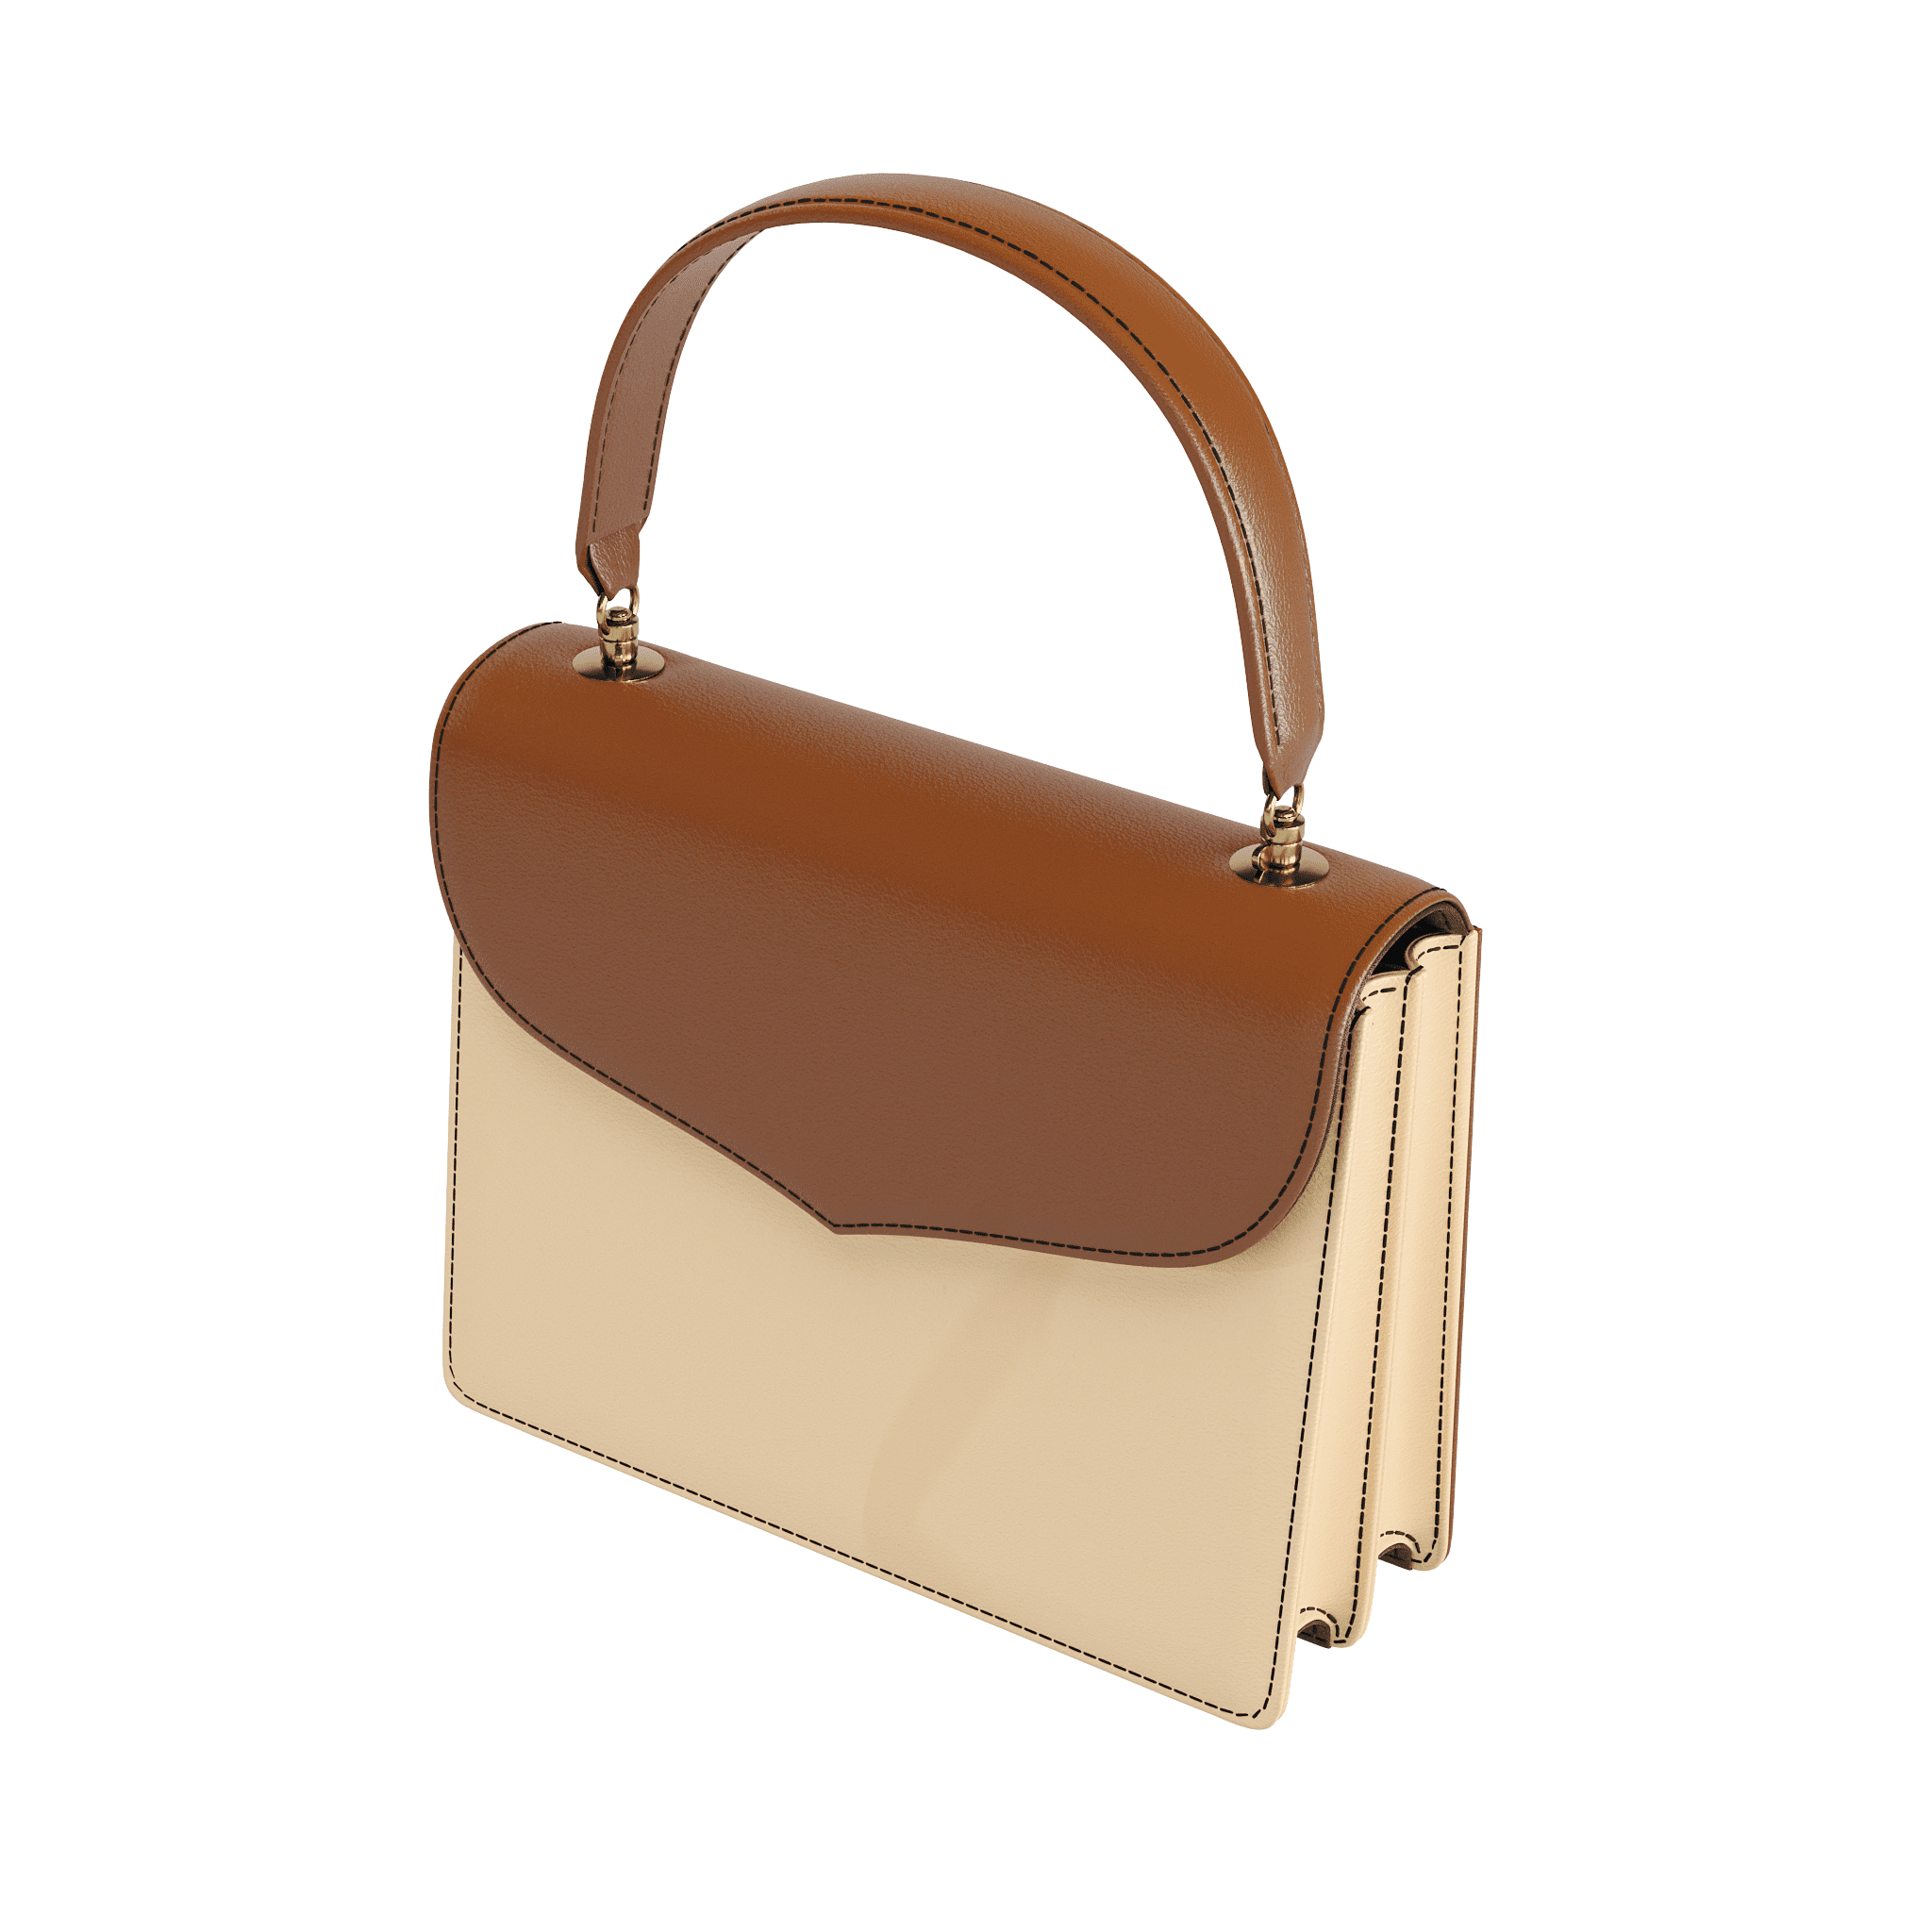 Two Tone Brown Handbag In Vegetable Tanned Leather